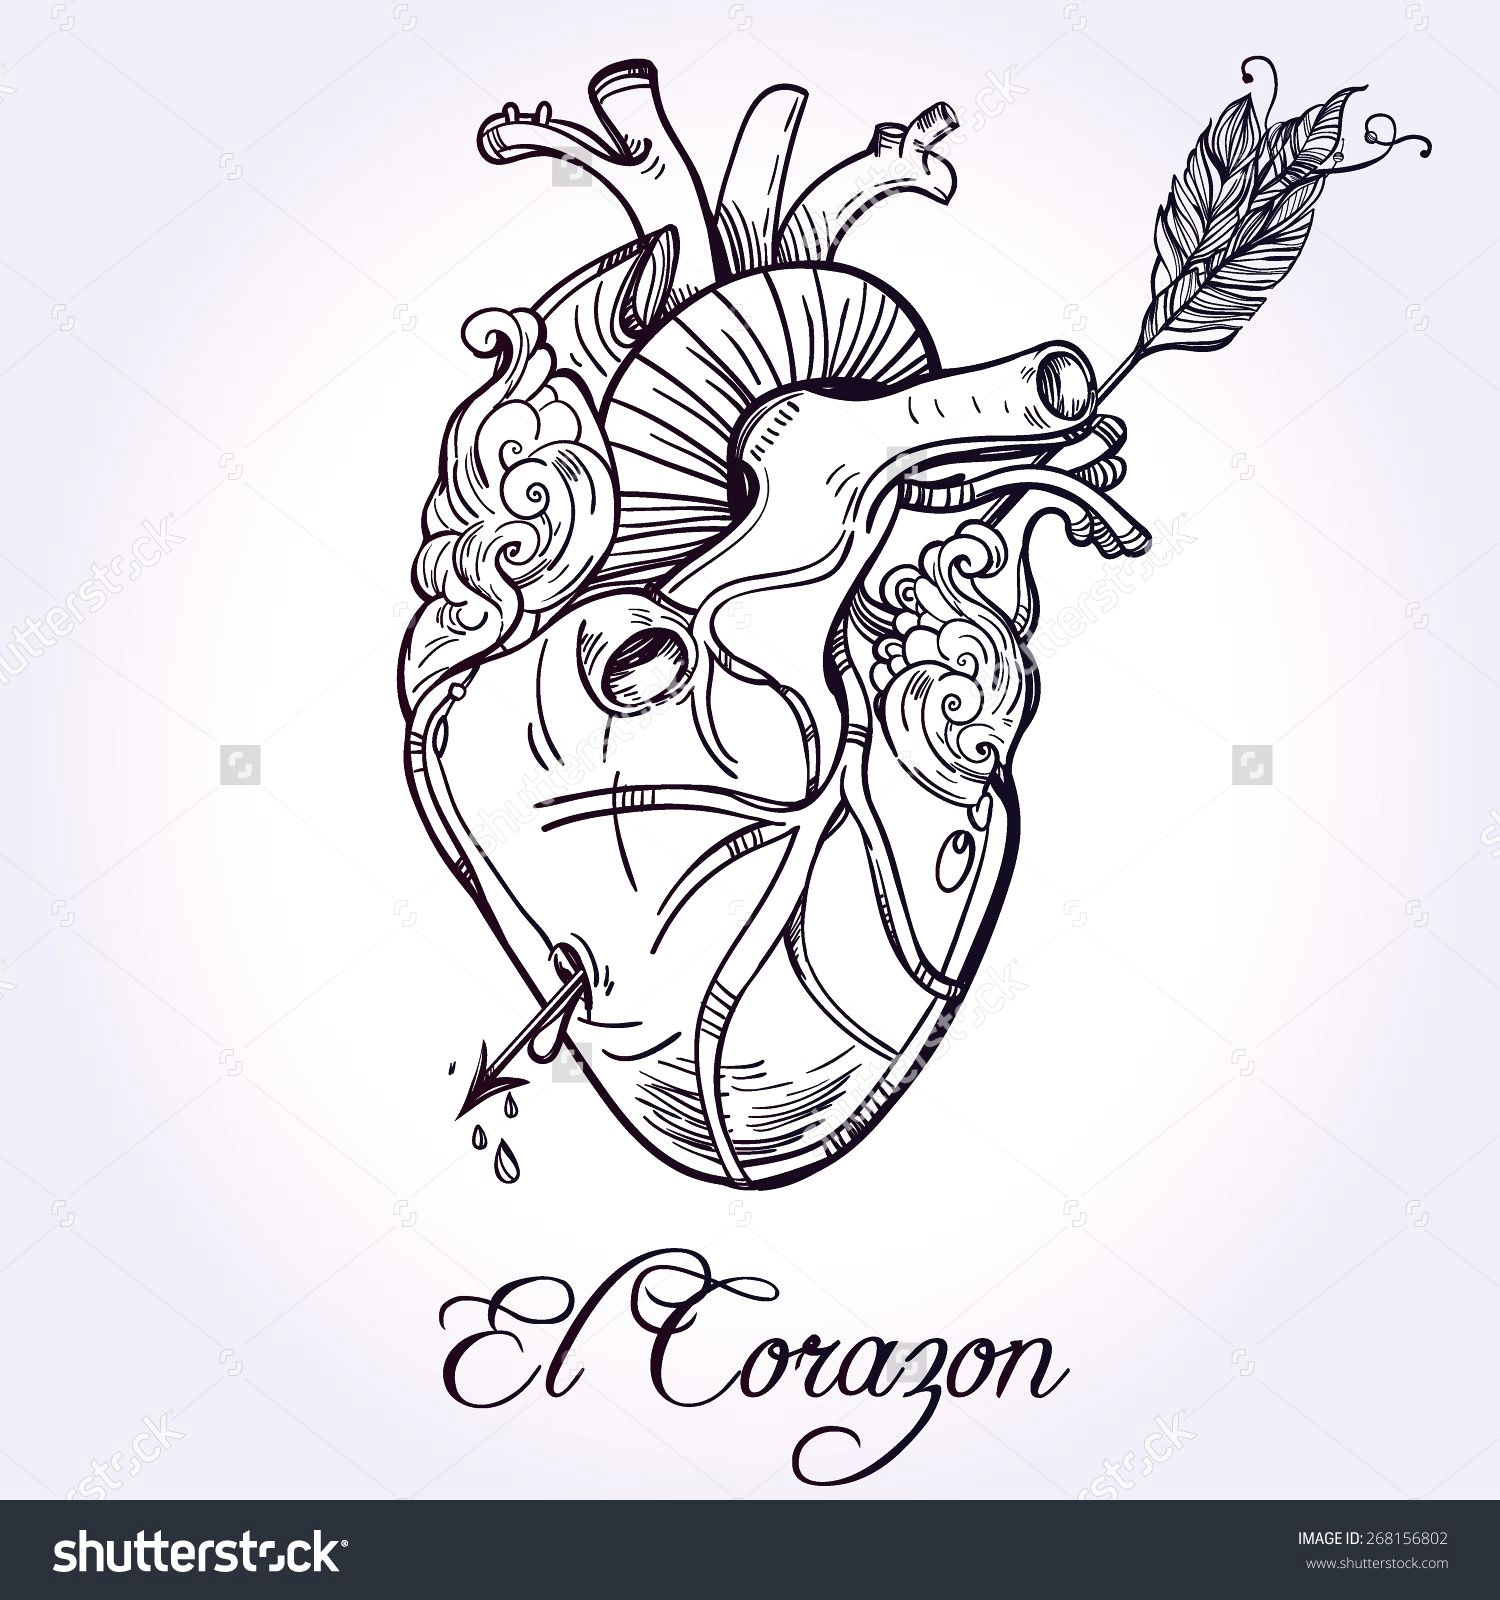 Drawing Of A Heart with An Arrow Sketched Hand Drawn Line Art Beautiful Human Heart with Arrow El